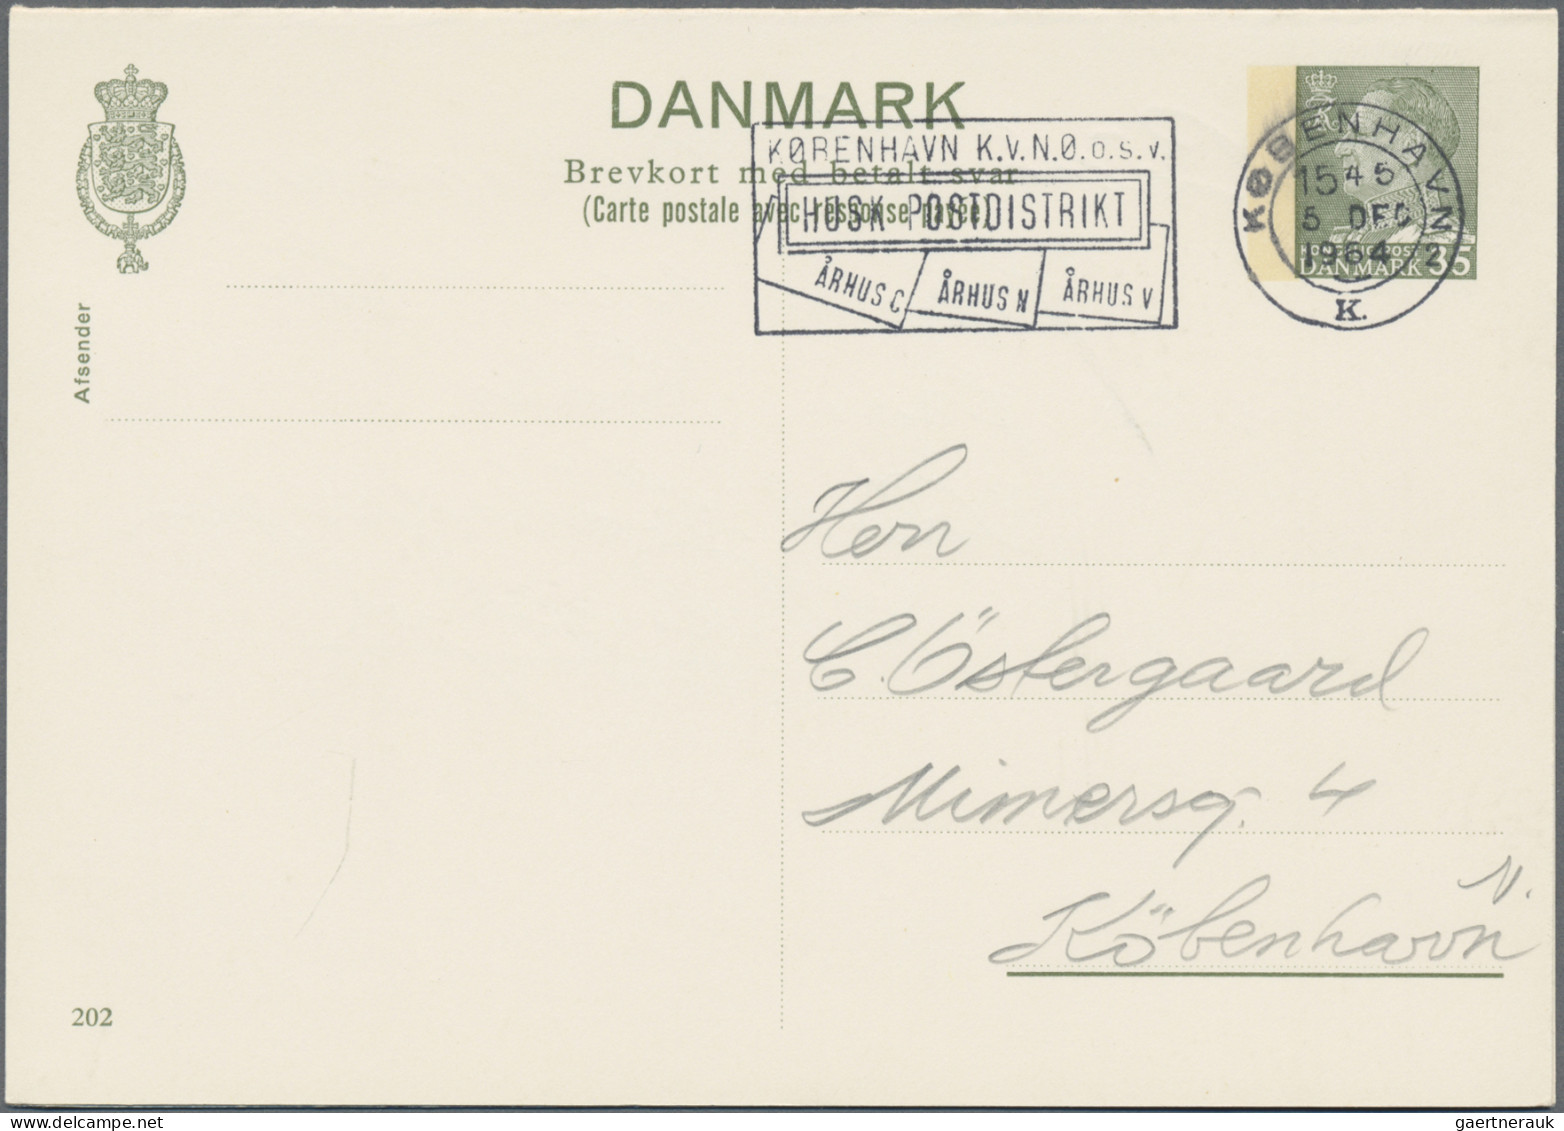 Denmark - postal stationery: 1888/1974, lot of 39 used stationeries incl. unseve